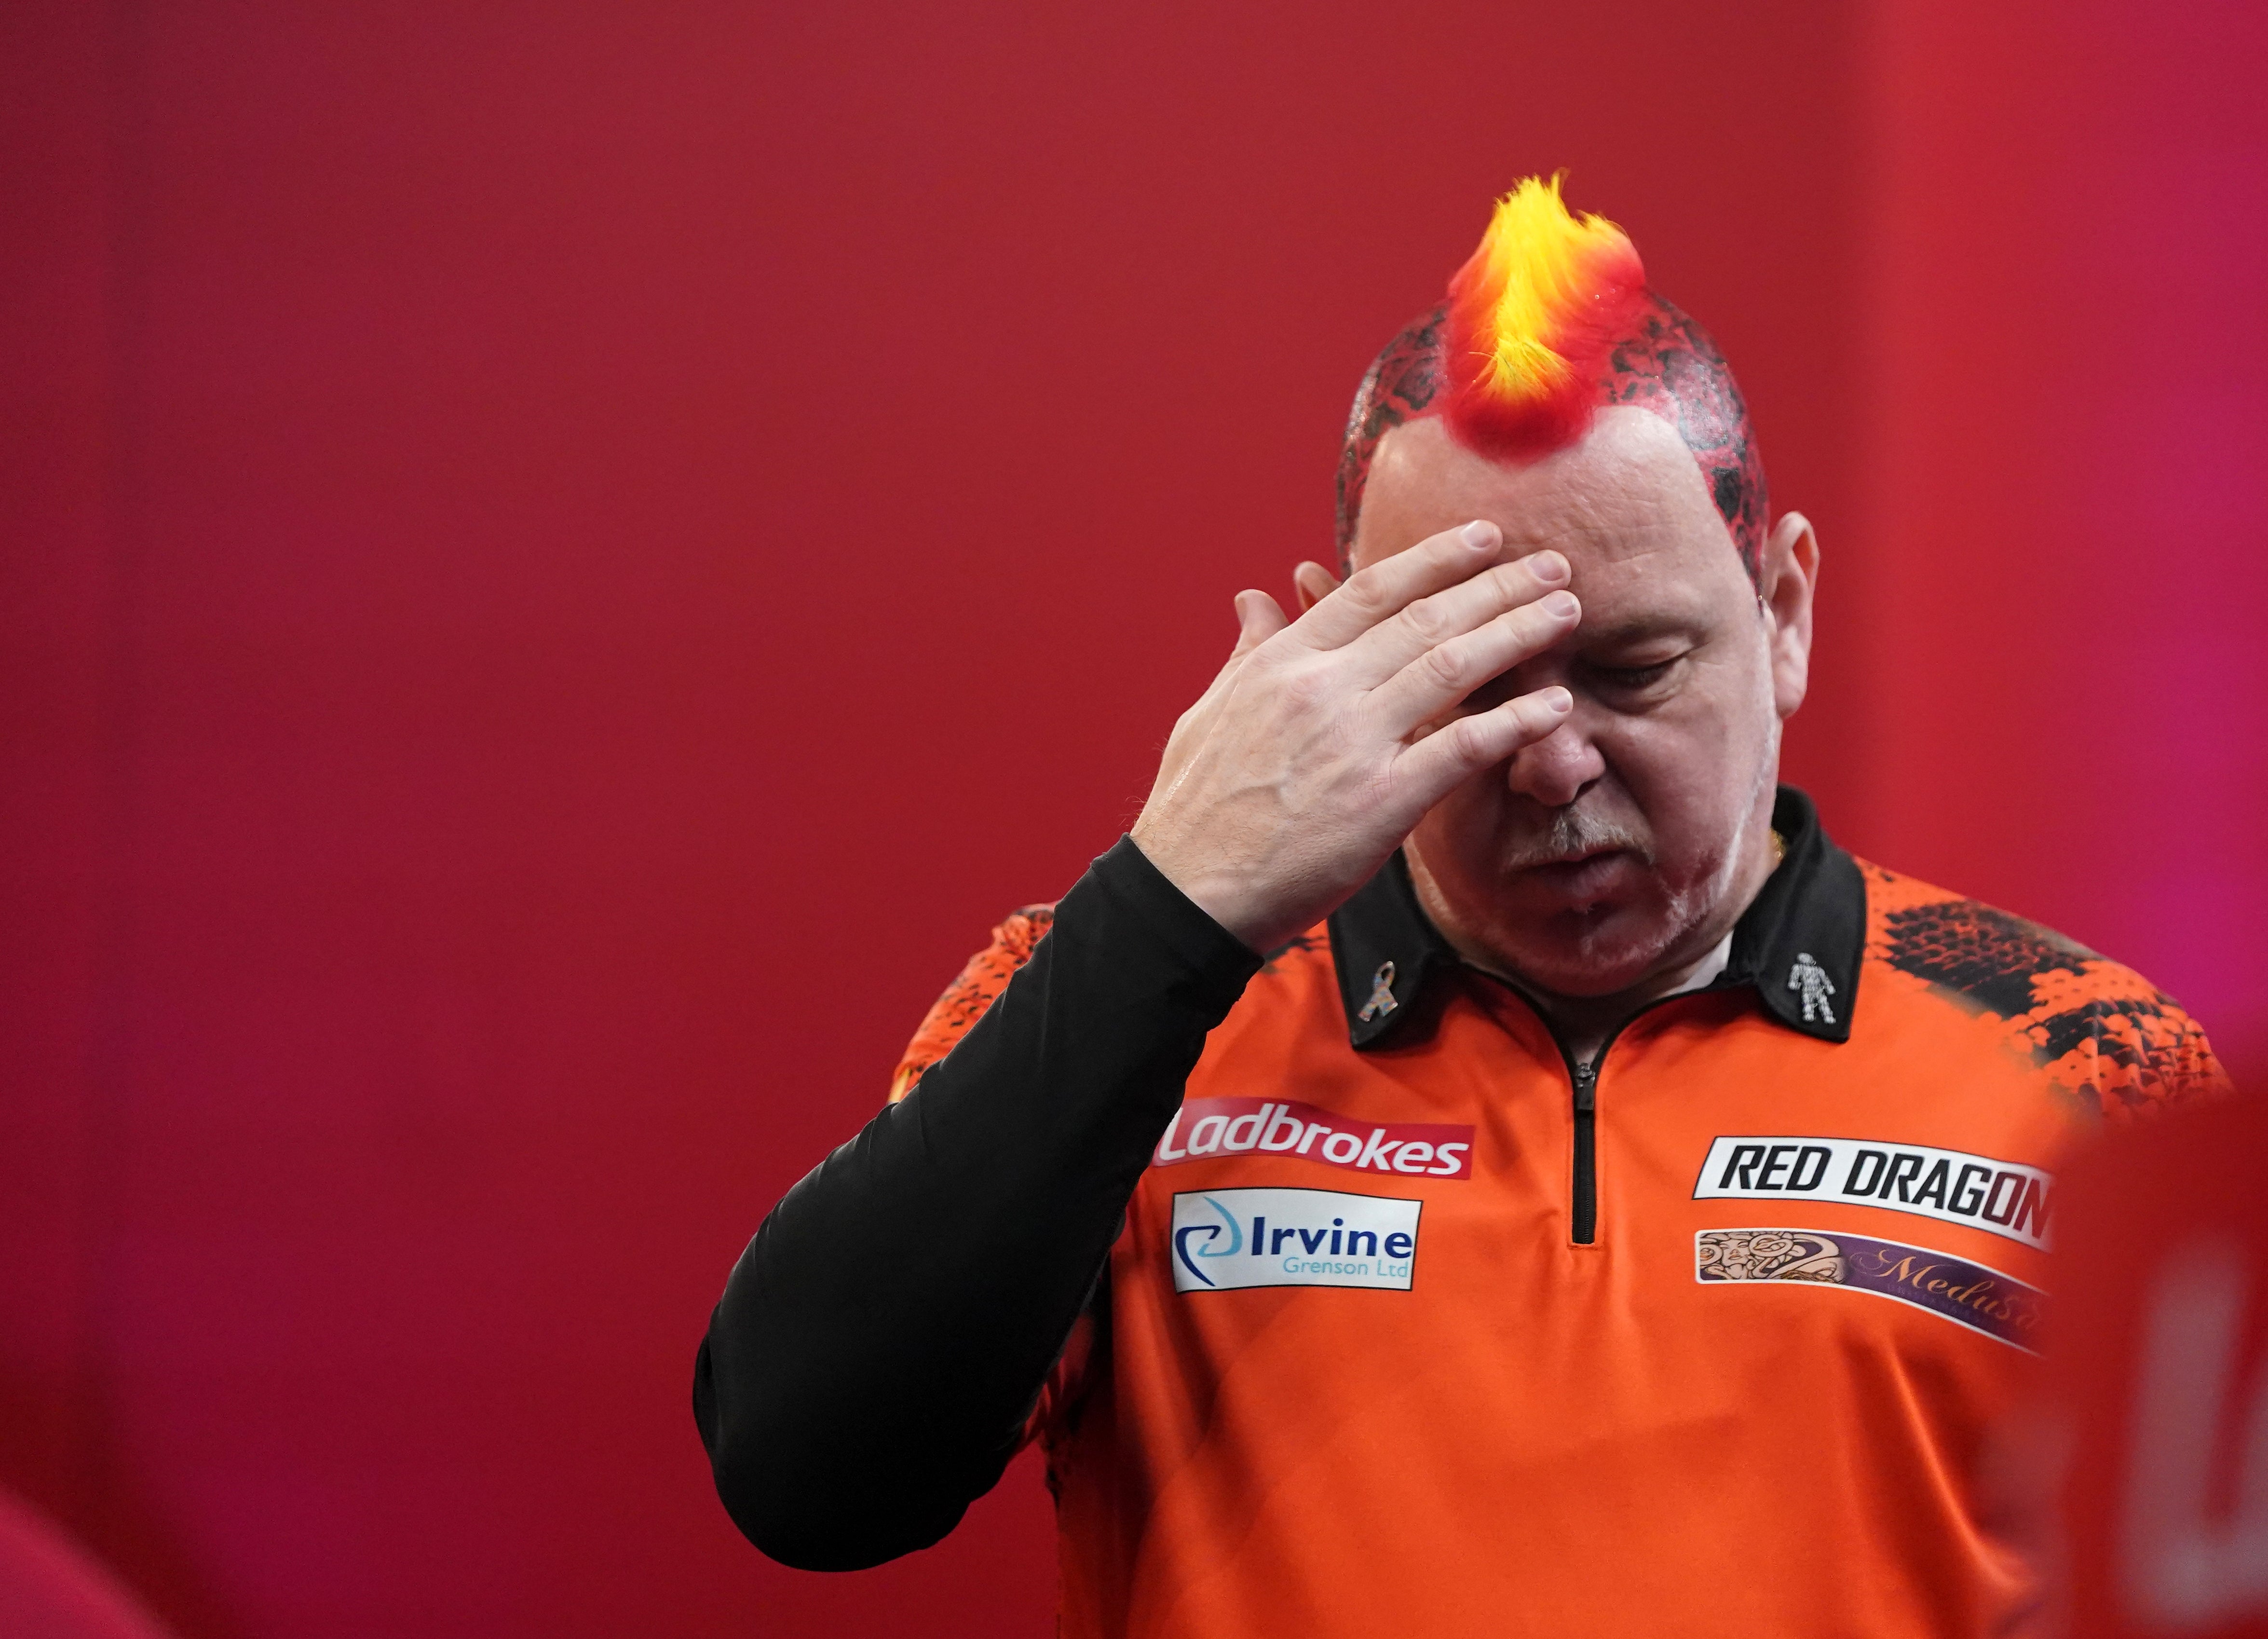 World number two Peter Wright cruised through to the second round of the World Matchplay Darts at the Winter Gardens